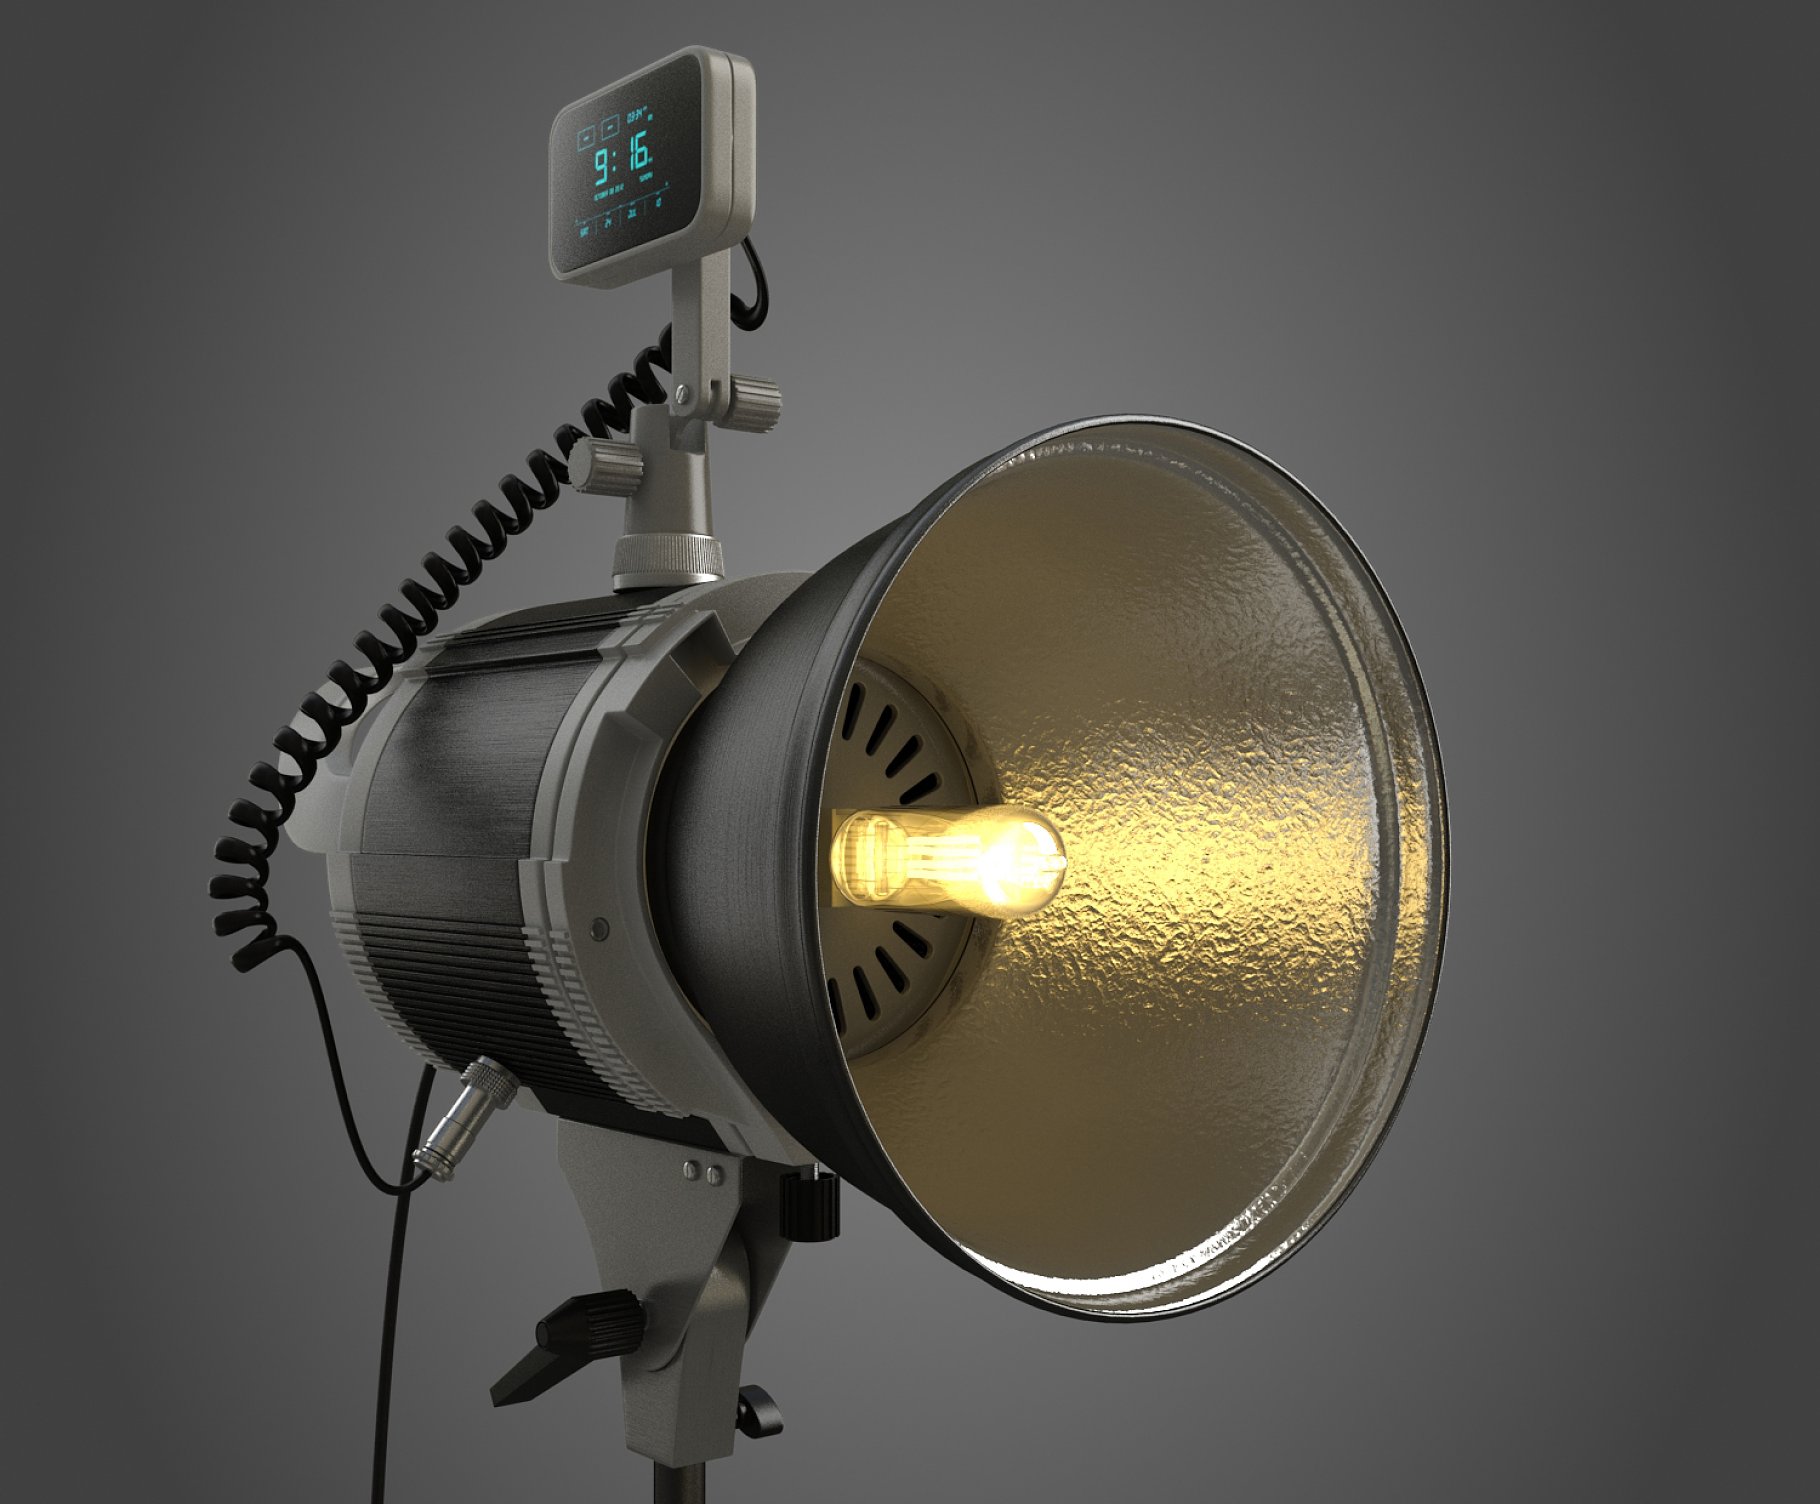 Rendering of a colorful 3d model of a professional studio lamp